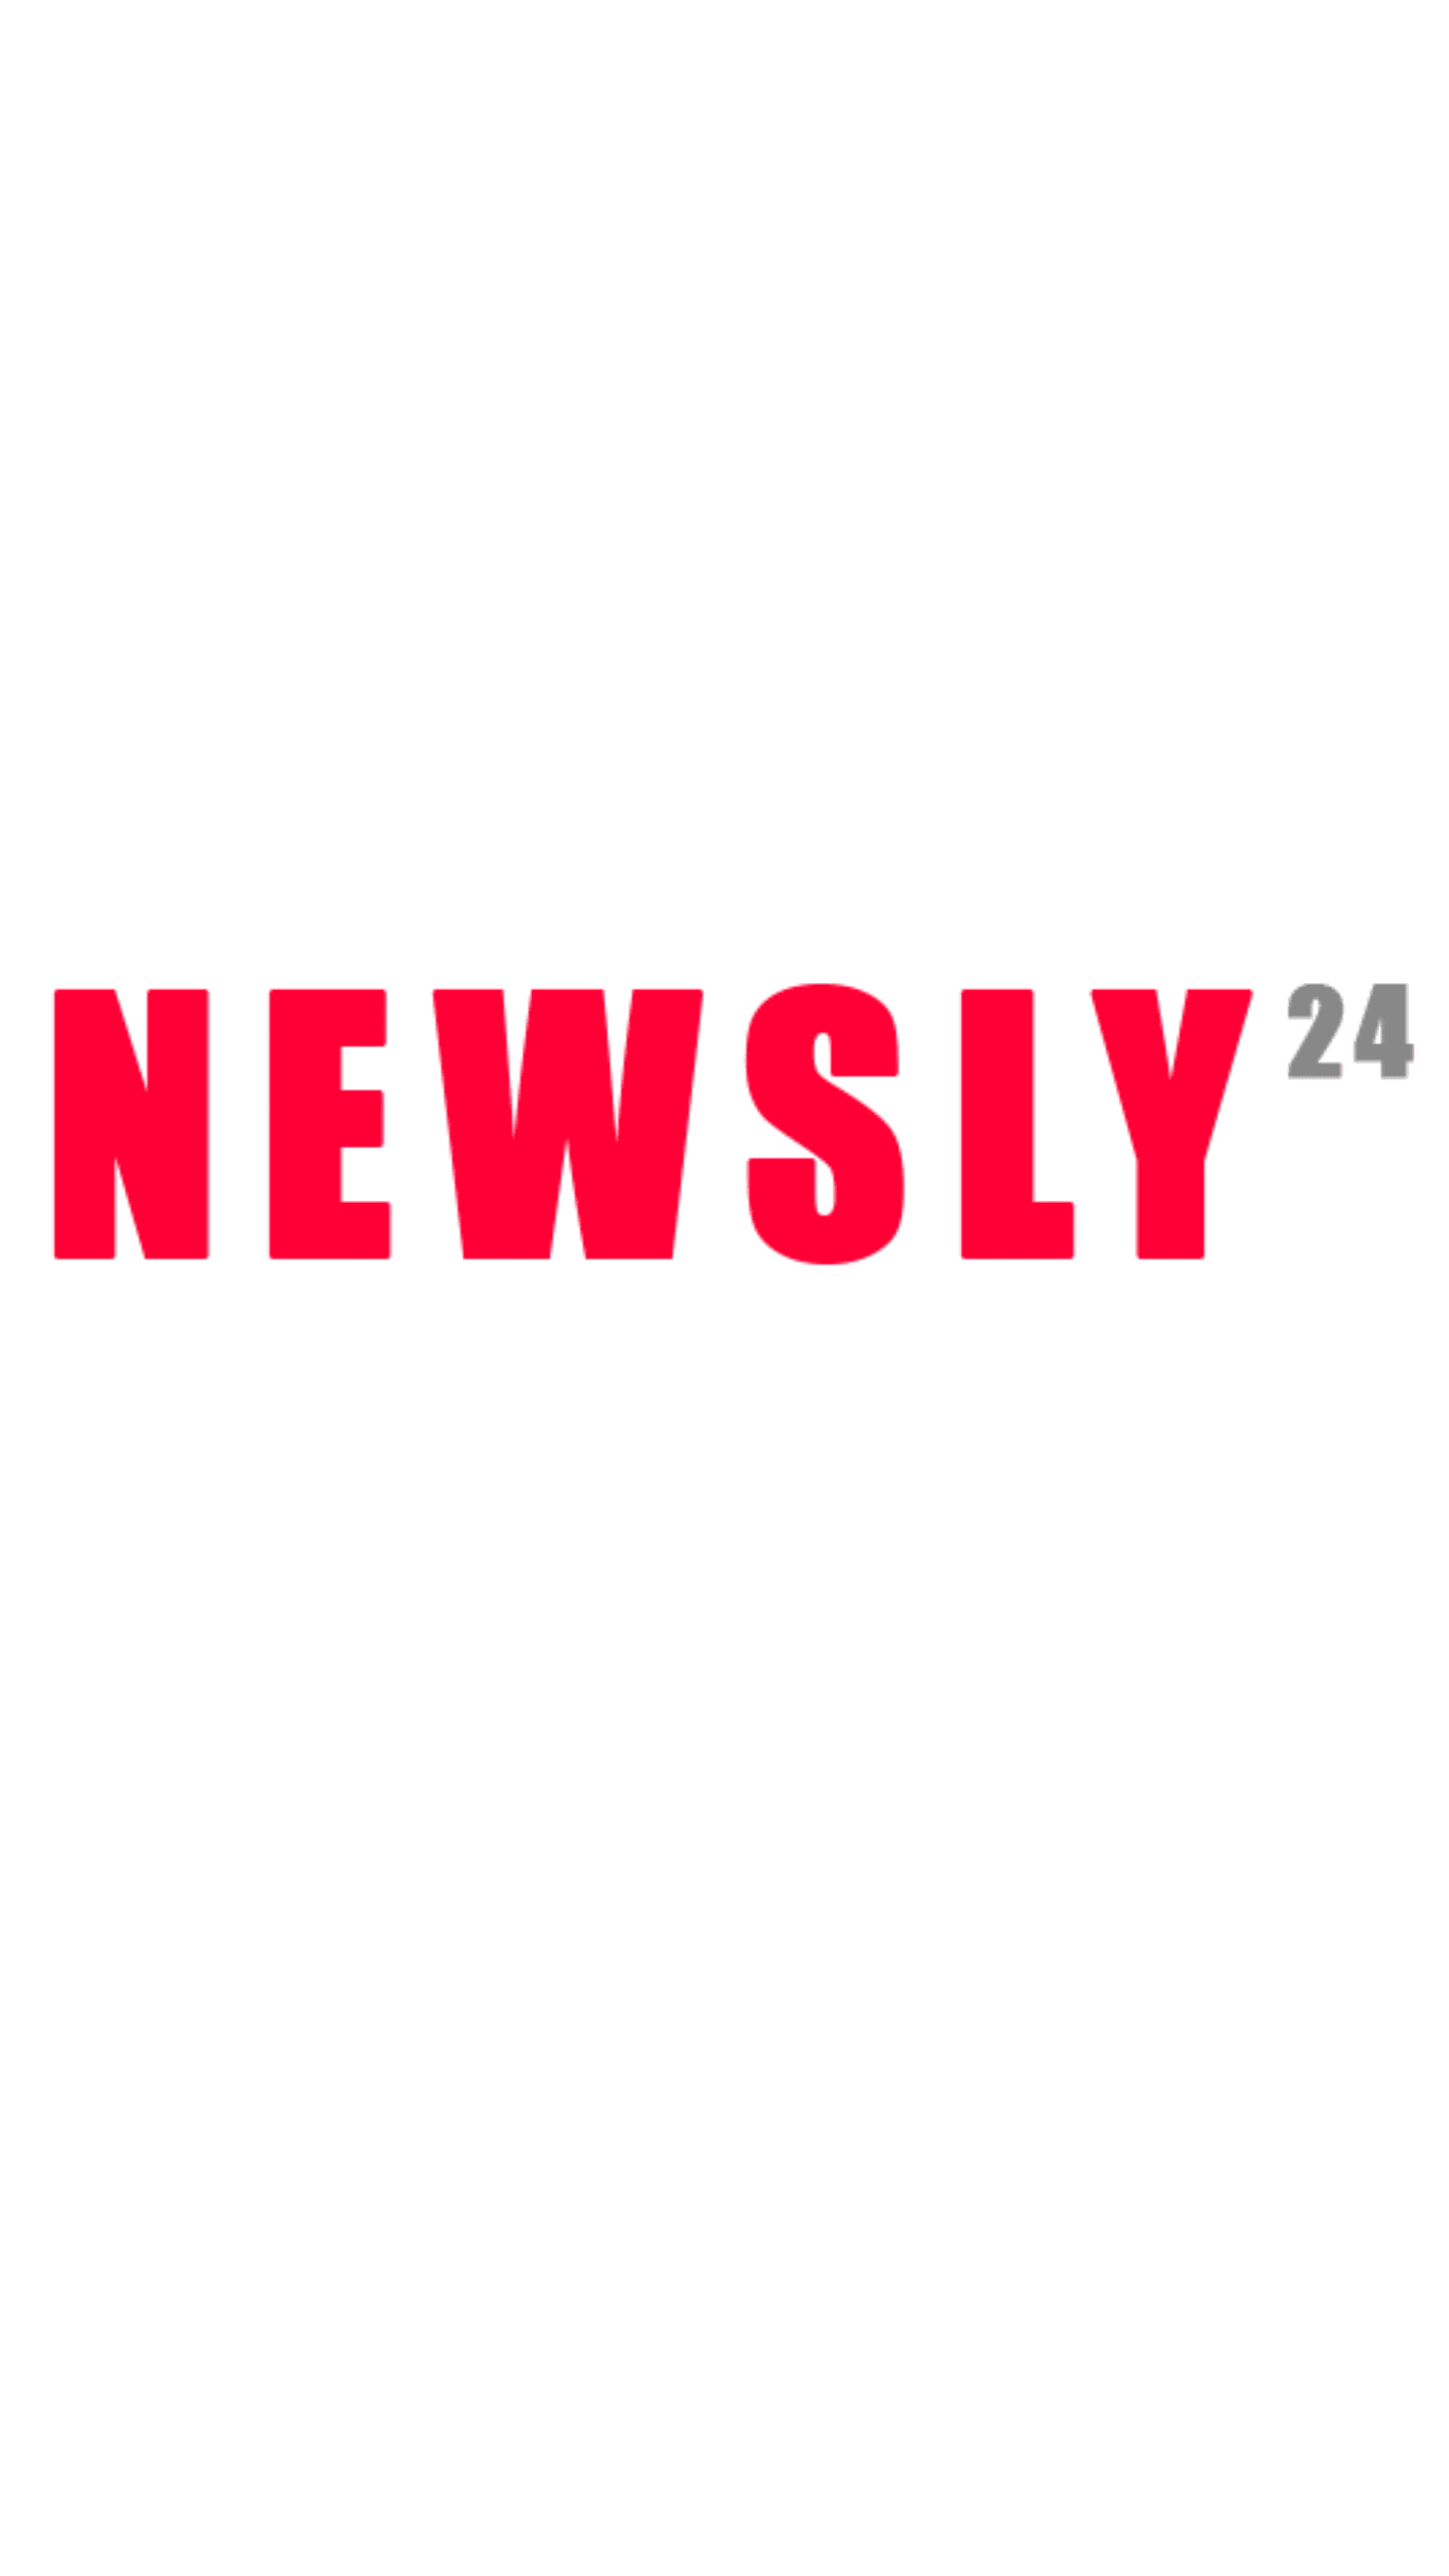 660/Presse/Newsly24.png